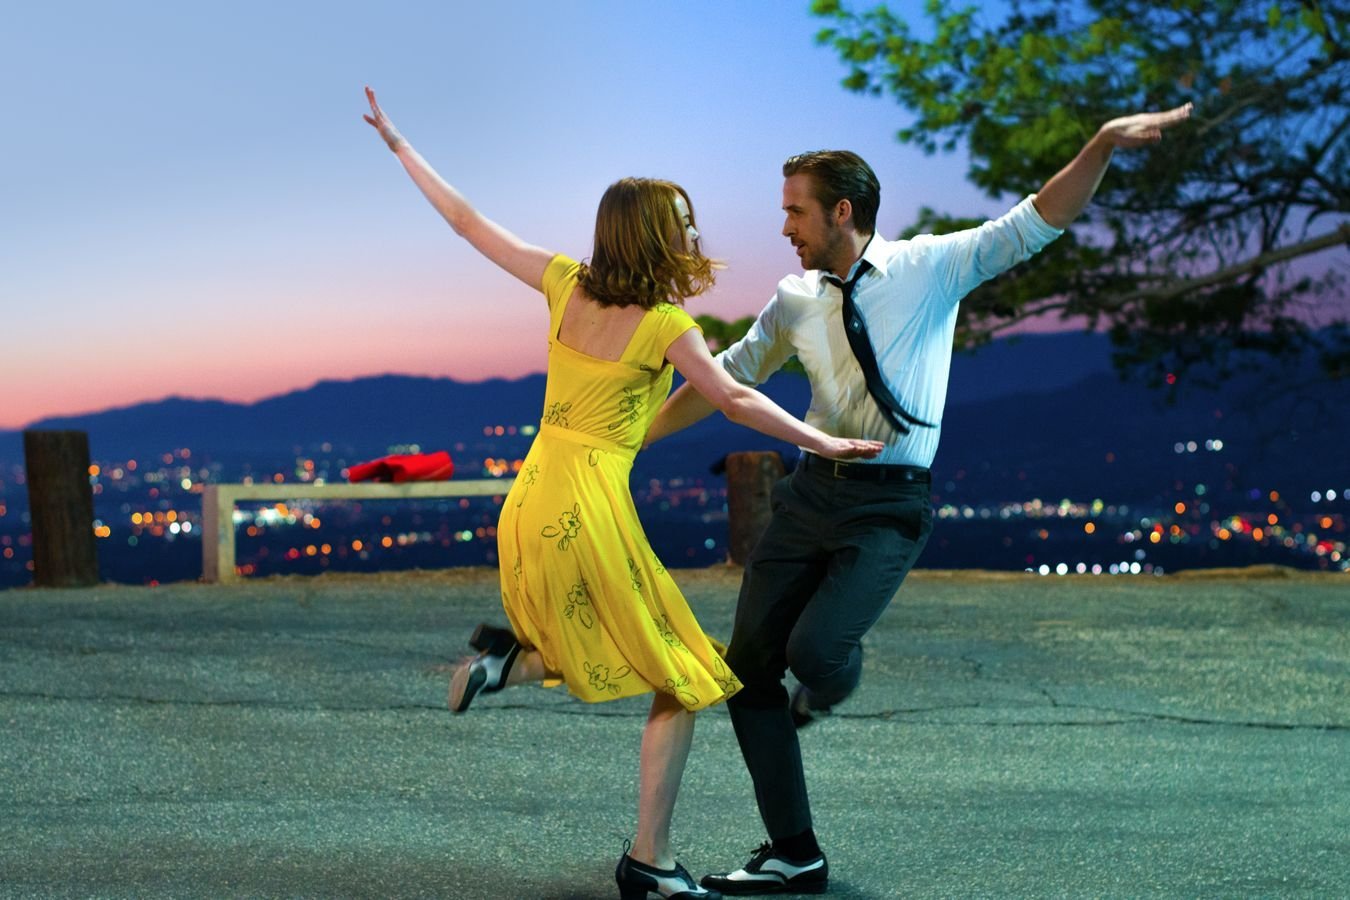 With 14 Oscar nominations, the musical "La La Land" could set a winning record at Sunday's Academy Awards. One of the film's sound supervisors is hoping to make a little history of her own.